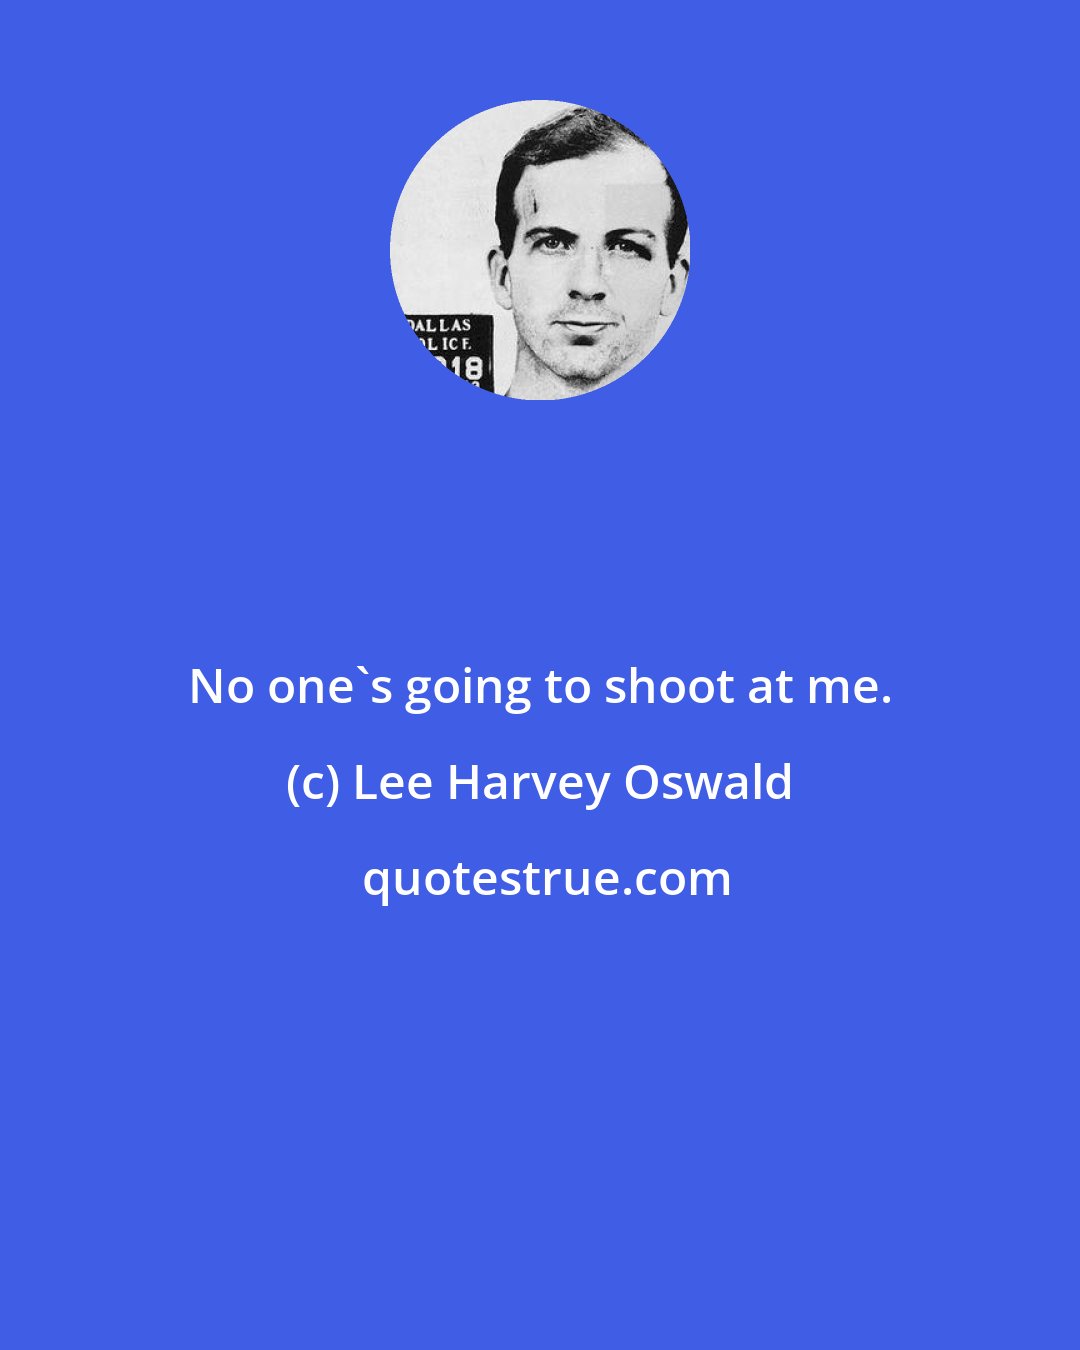 Lee Harvey Oswald: No one's going to shoot at me.